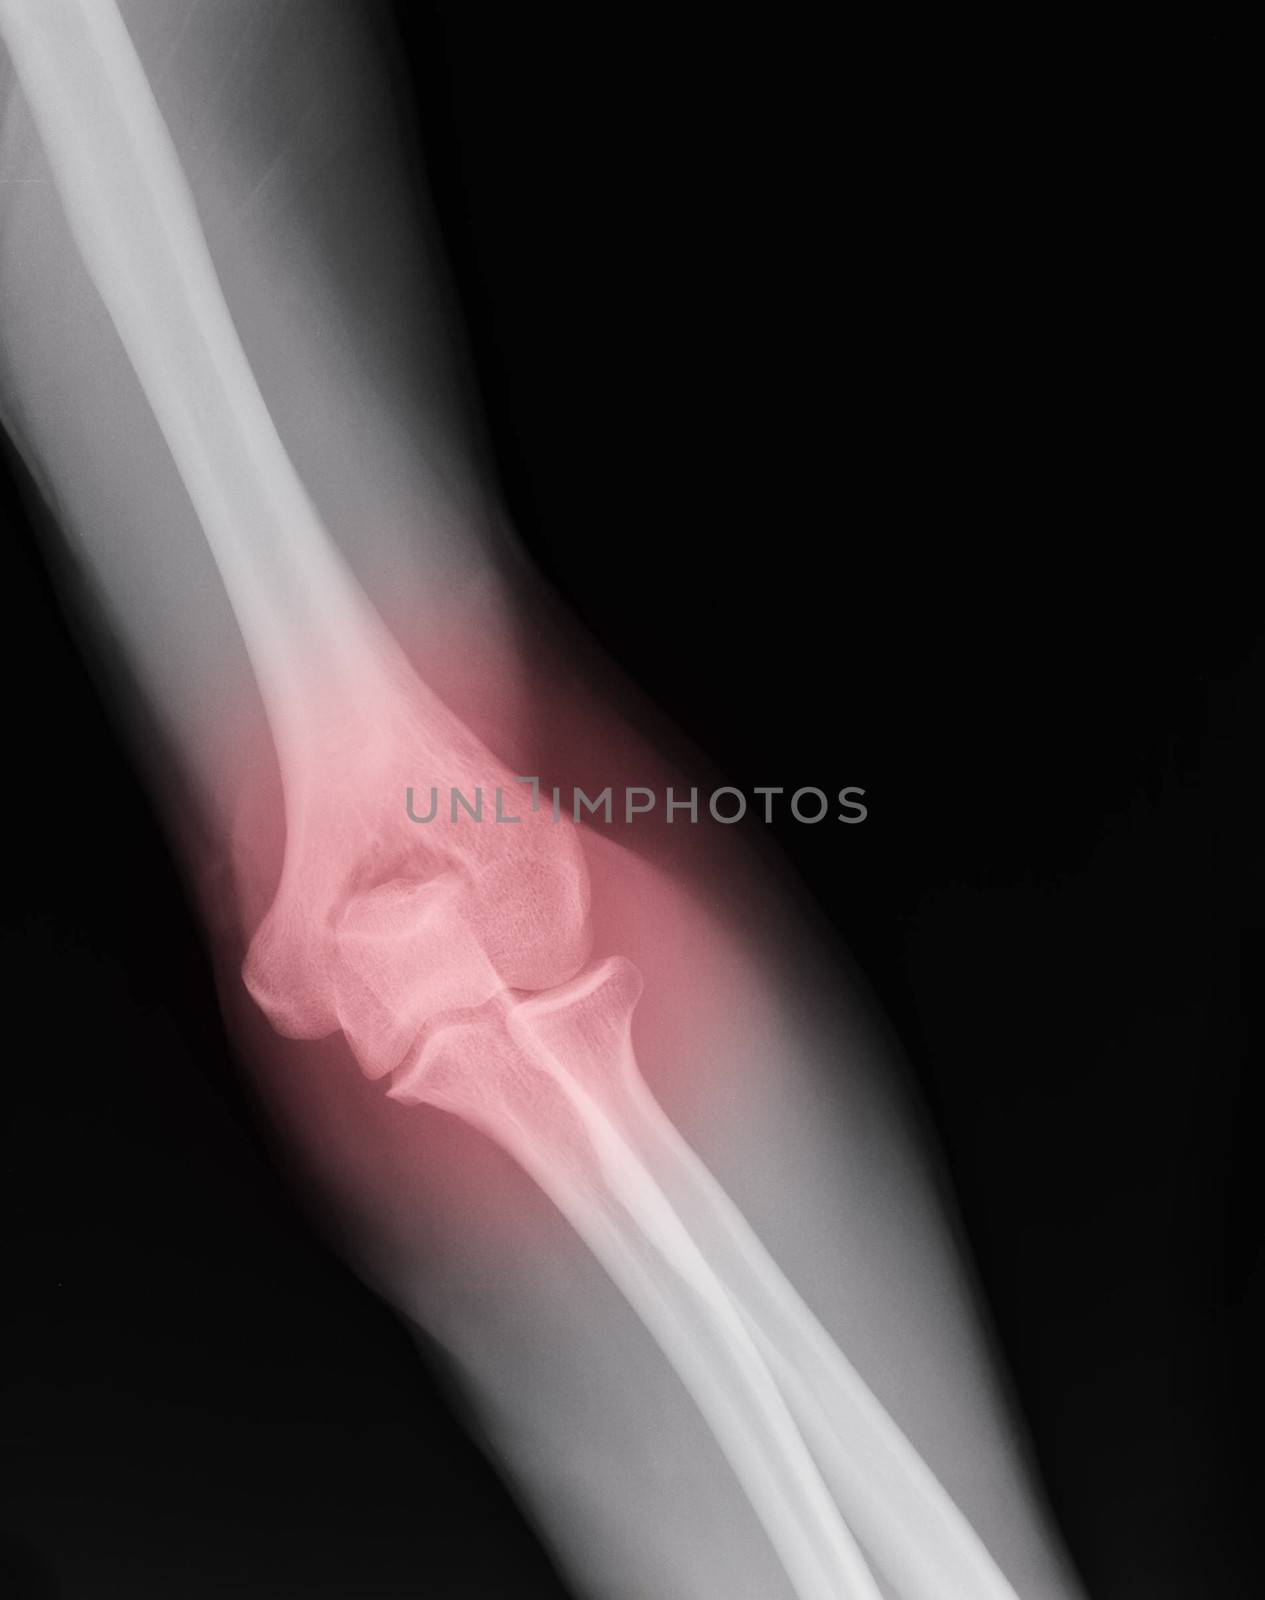 xray of an arm with elbow joint visible and red pain circle